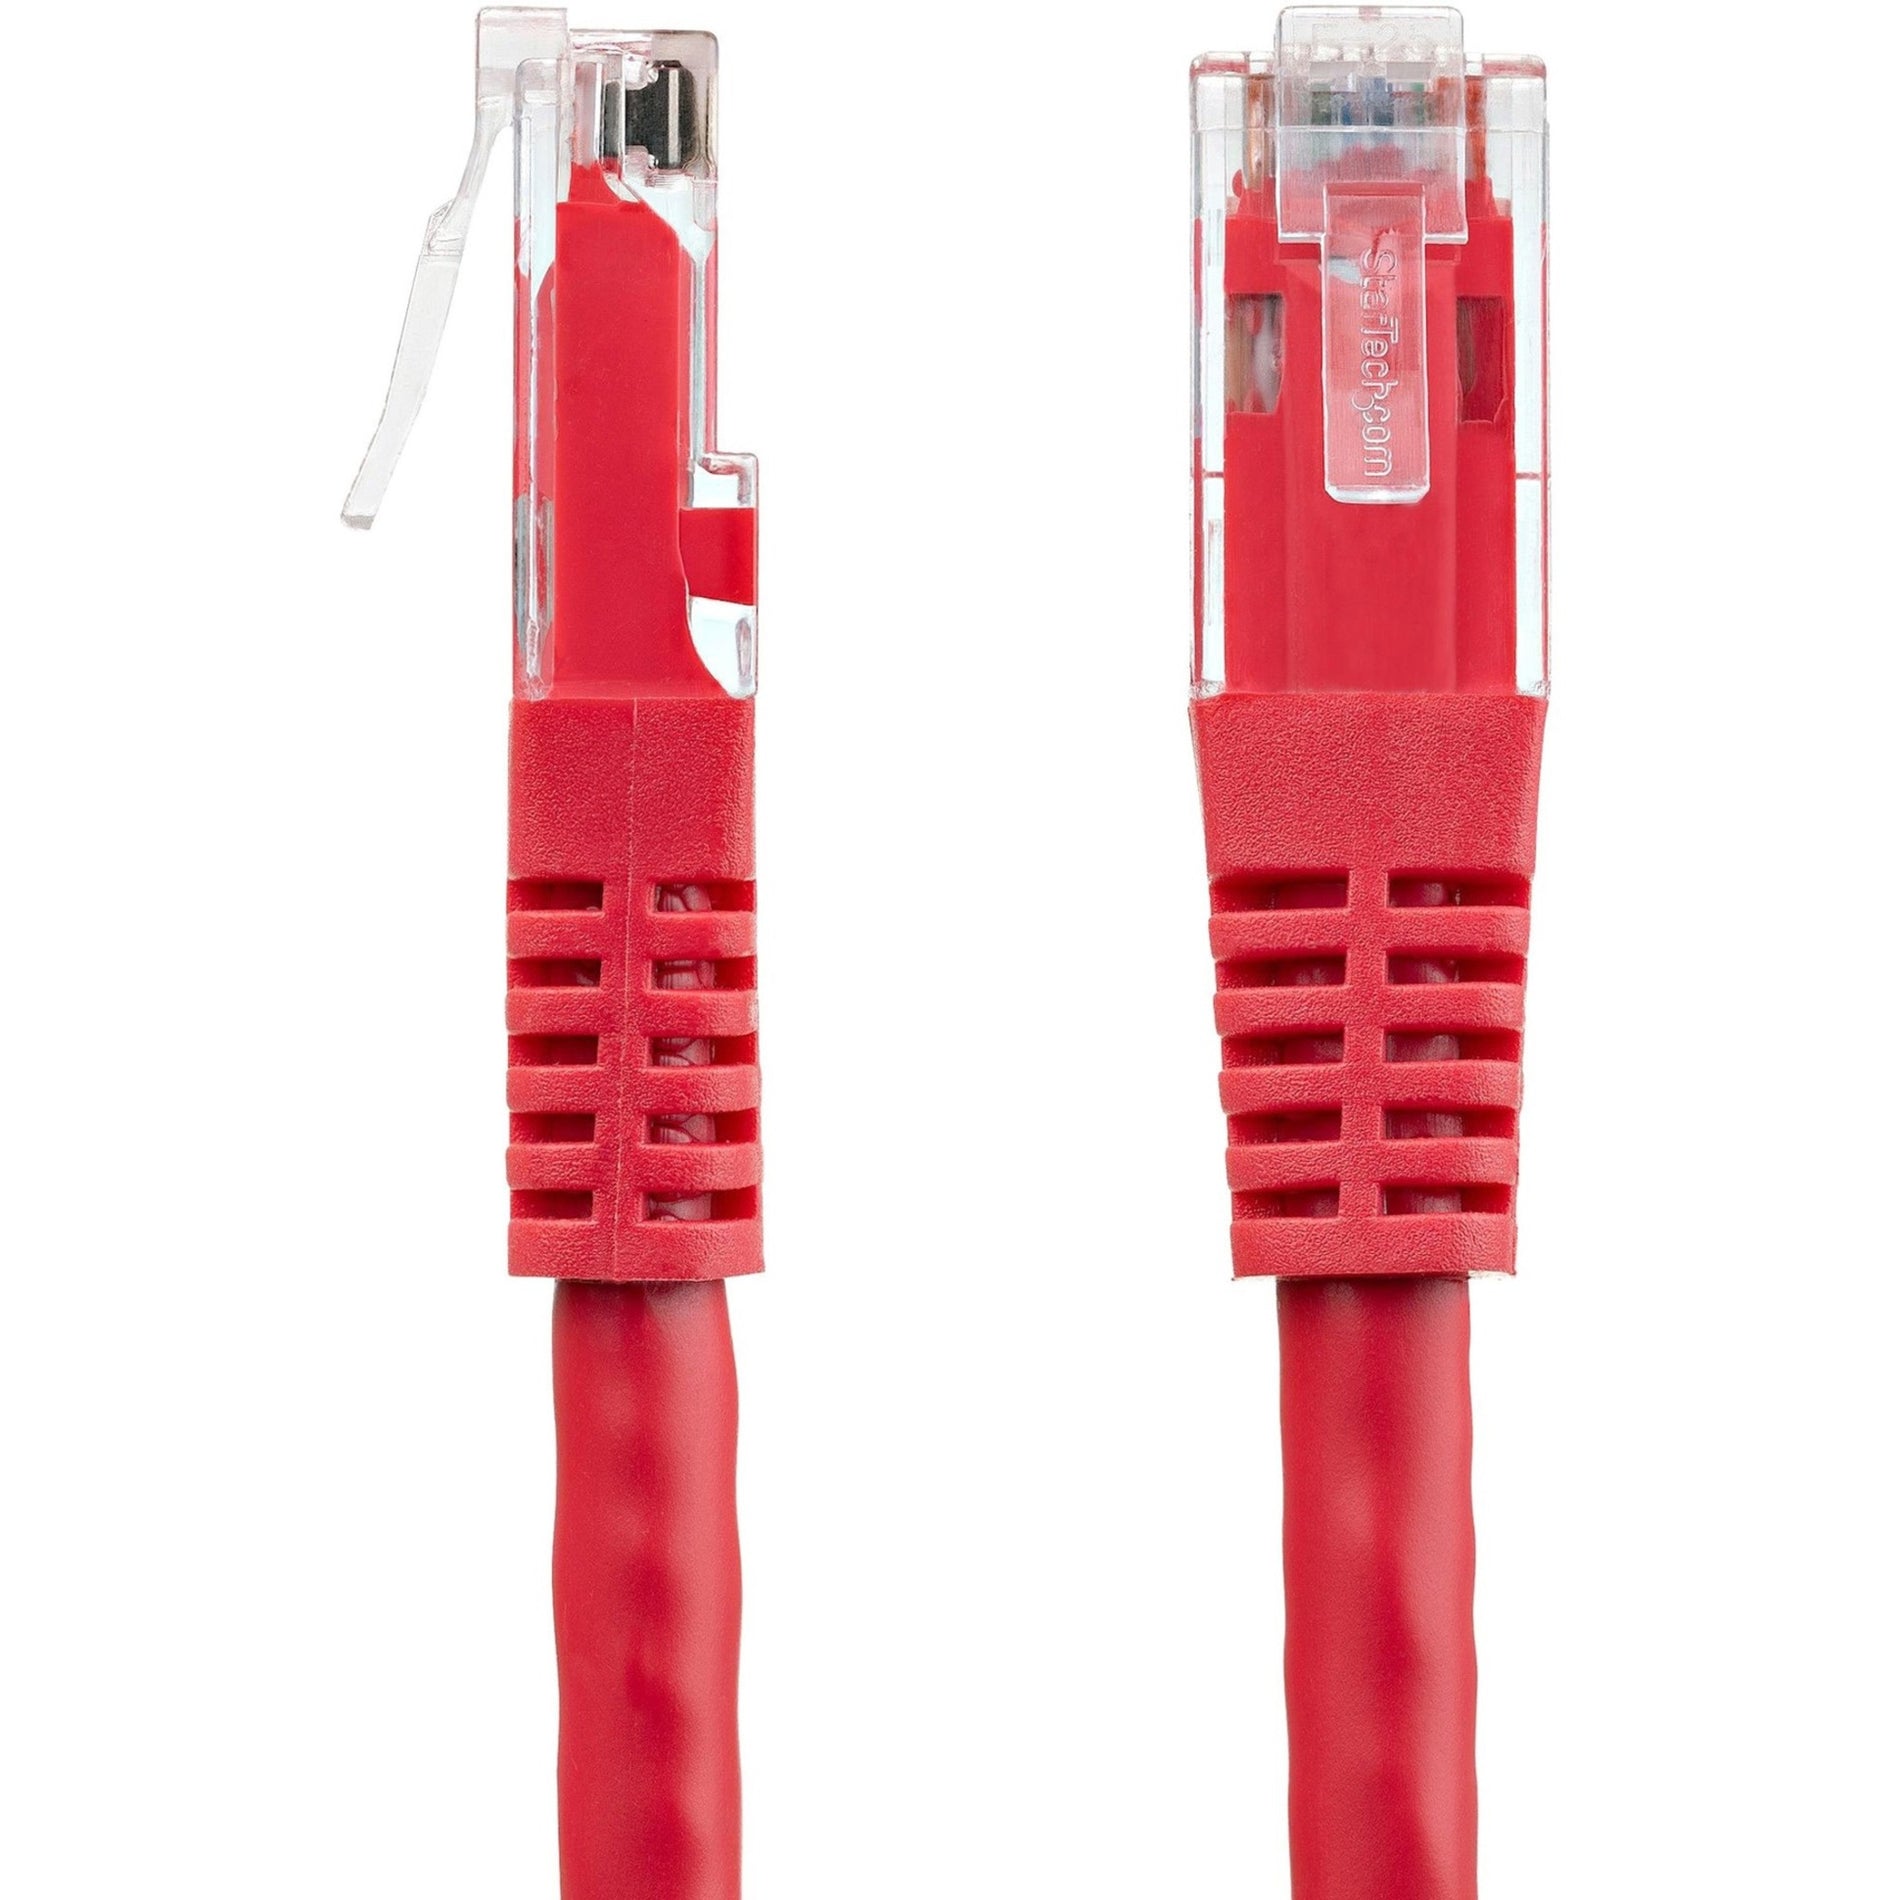 StarTech.com C6PATCH1RD 1ft Red Cat6 UTP Patch Cable ETL Verified, 10 Gbit/s Data Transfer Rate, Gold Plated Connectors